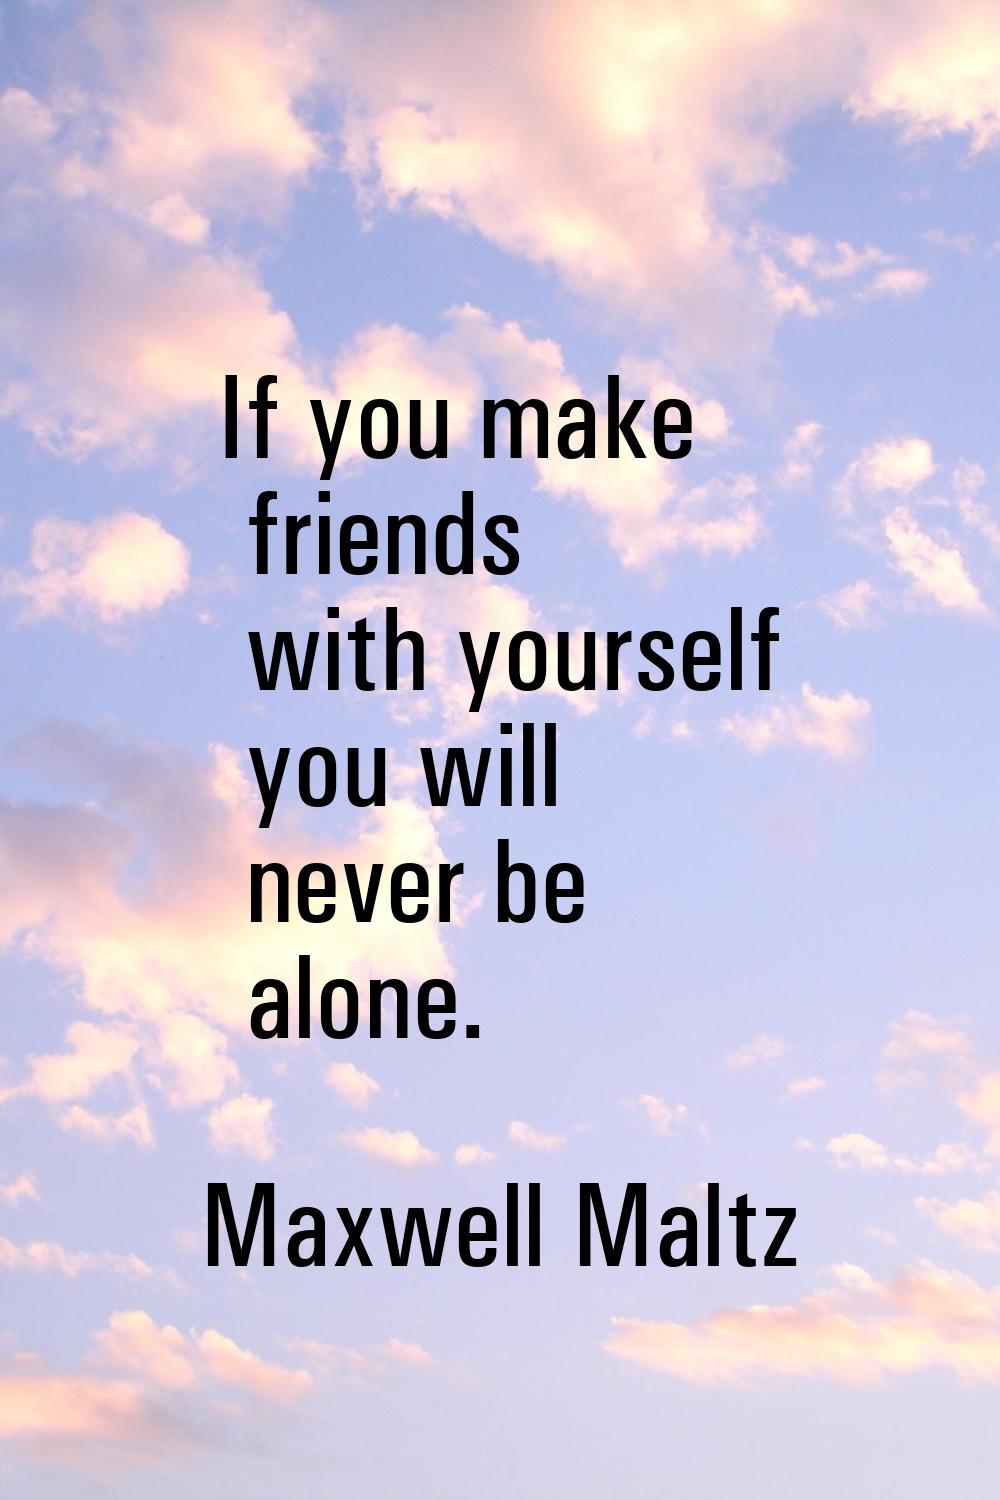 If you make friends with yourself you will never be alone.